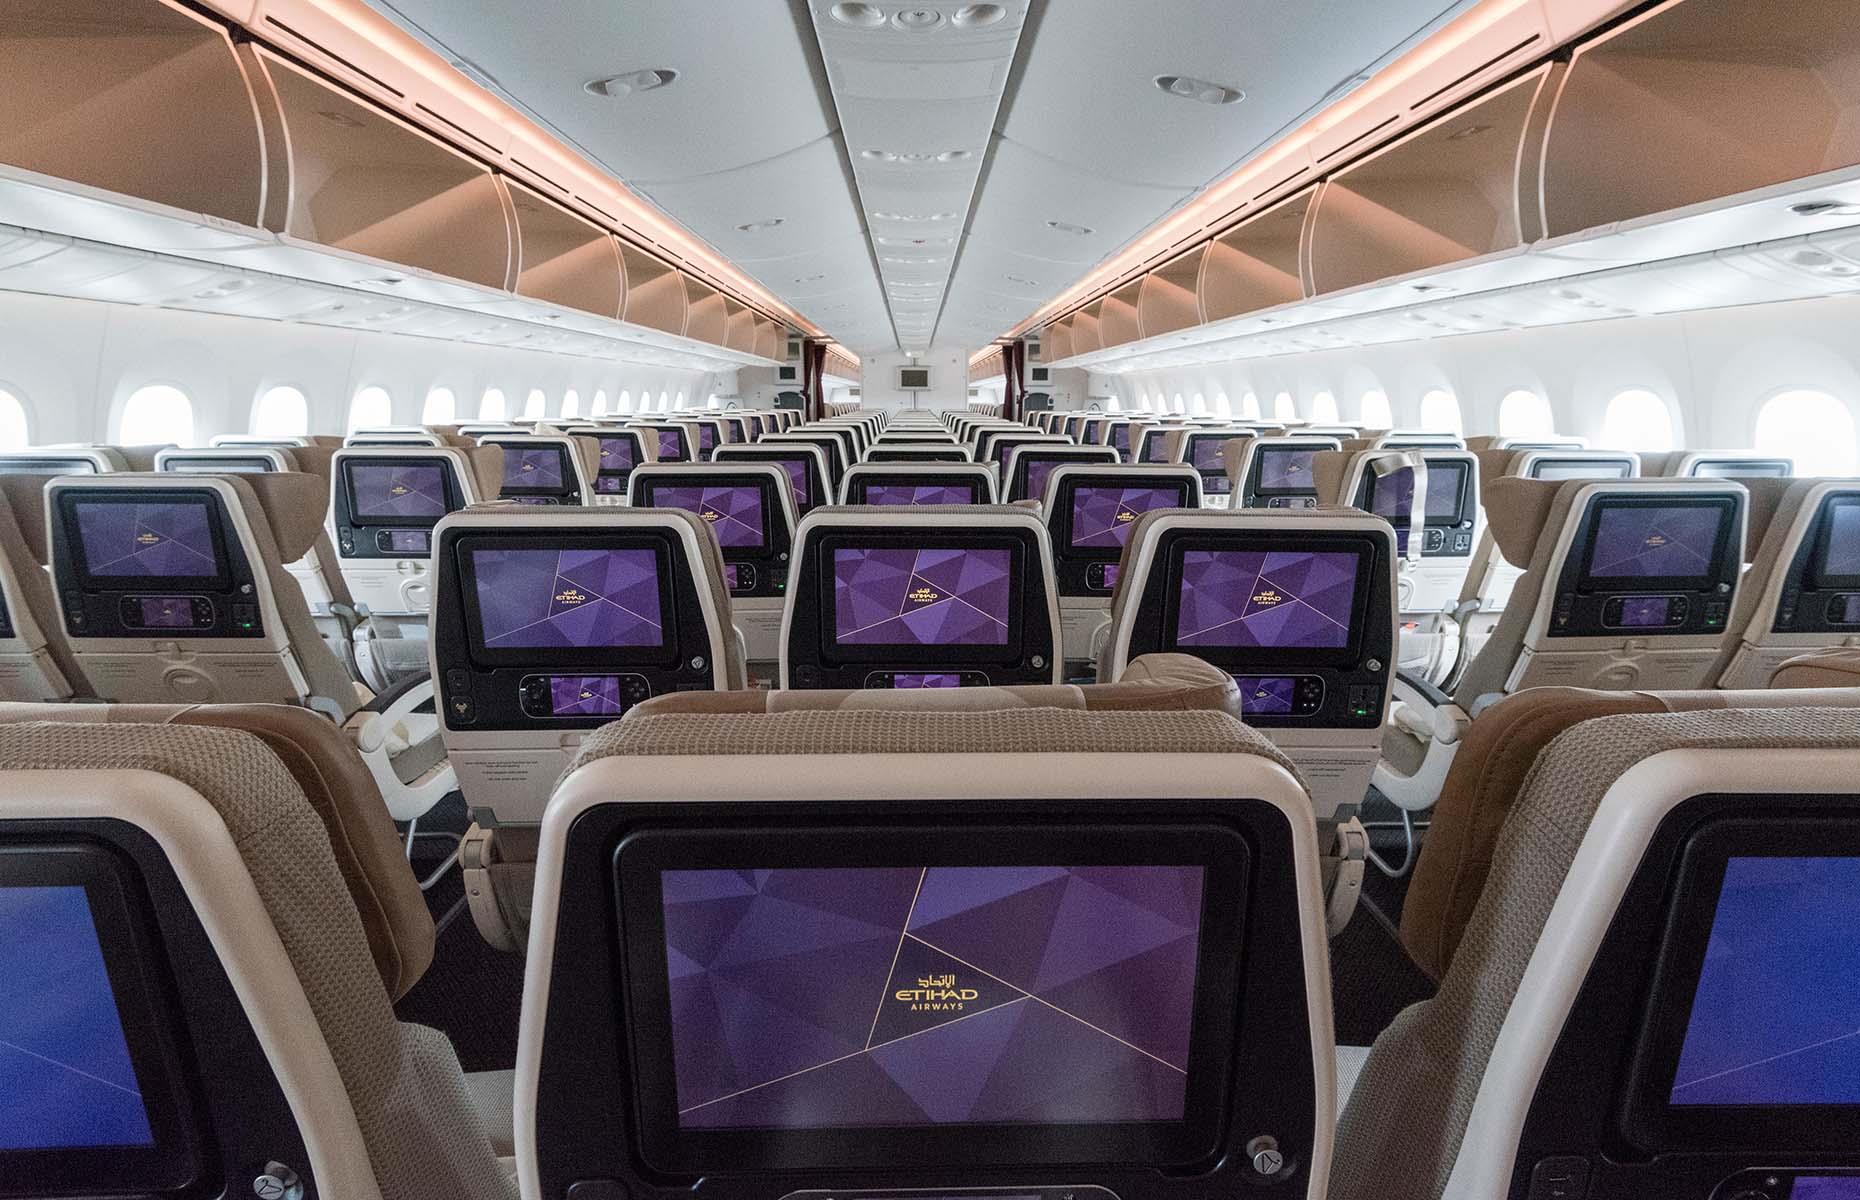 <p>Inside, the 787 can seat up to 336 passengers with as many as nine seats and two aisles abreast. Thanks to the composite body, the aircraft has larger windows that have replaced plastic window shades with smart glass that offers five levels of transparency. The Dreamliner also claims to minimise jet lag thanks to higher pressure inside the aircraft and higher humidity levels (15% instead of the typical 4%), which leaves passengers more refreshed.</p>  <p><a href="https://www.loveexploring.com/galleries/76761/what-air-travel-will-look-like-in-2030?page=1"><strong>Here's how air travel could look like in the future</strong></a></p>